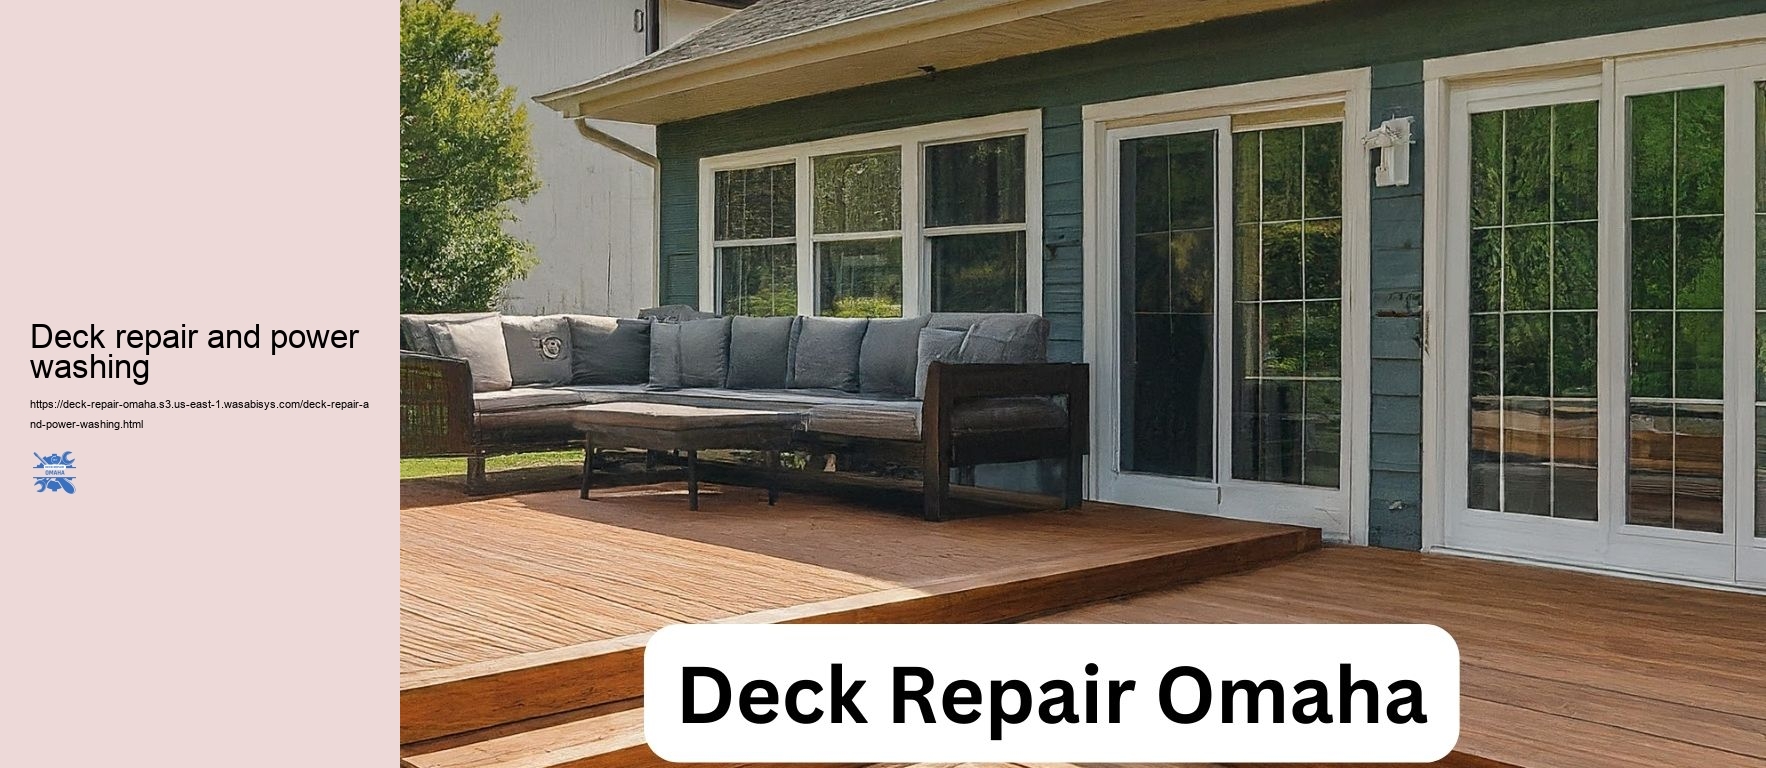 Deck repair and power washing